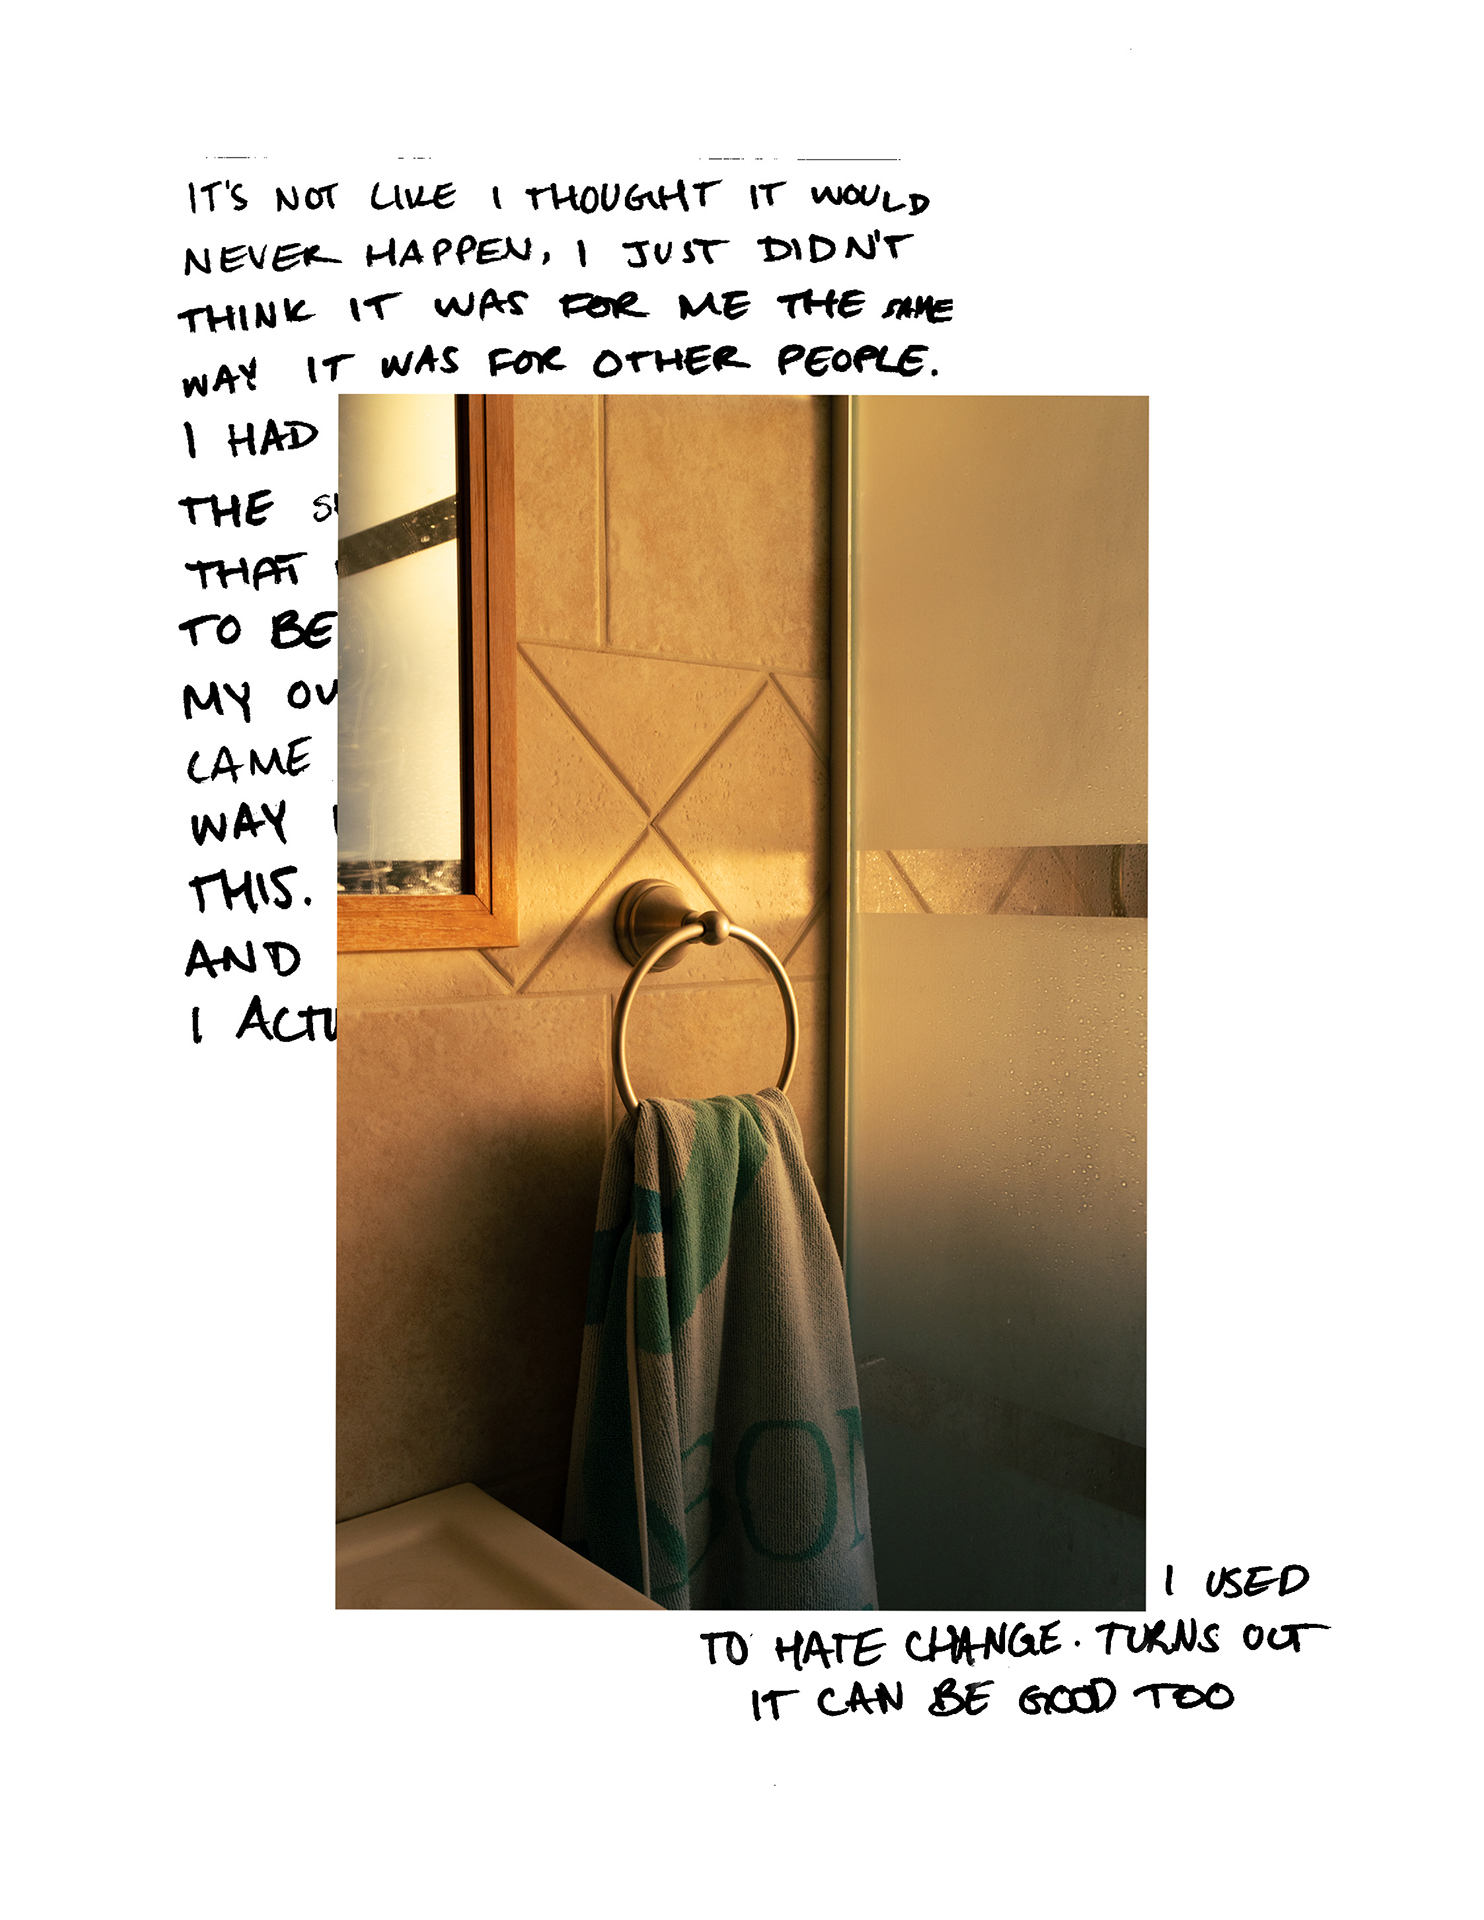 A photograph of a towel hung on a hook next to a shower in a bathroom, warm toned from the sunset at dusk. The image is placed over handwritten text in the top left and bottom right corners, covering most of it. The visible text reads "It's not like I thought it would never happen, I just didn't think it was for me the same way it was for other people... I used to hate change. Turns out it can be good too" in all capital letters.